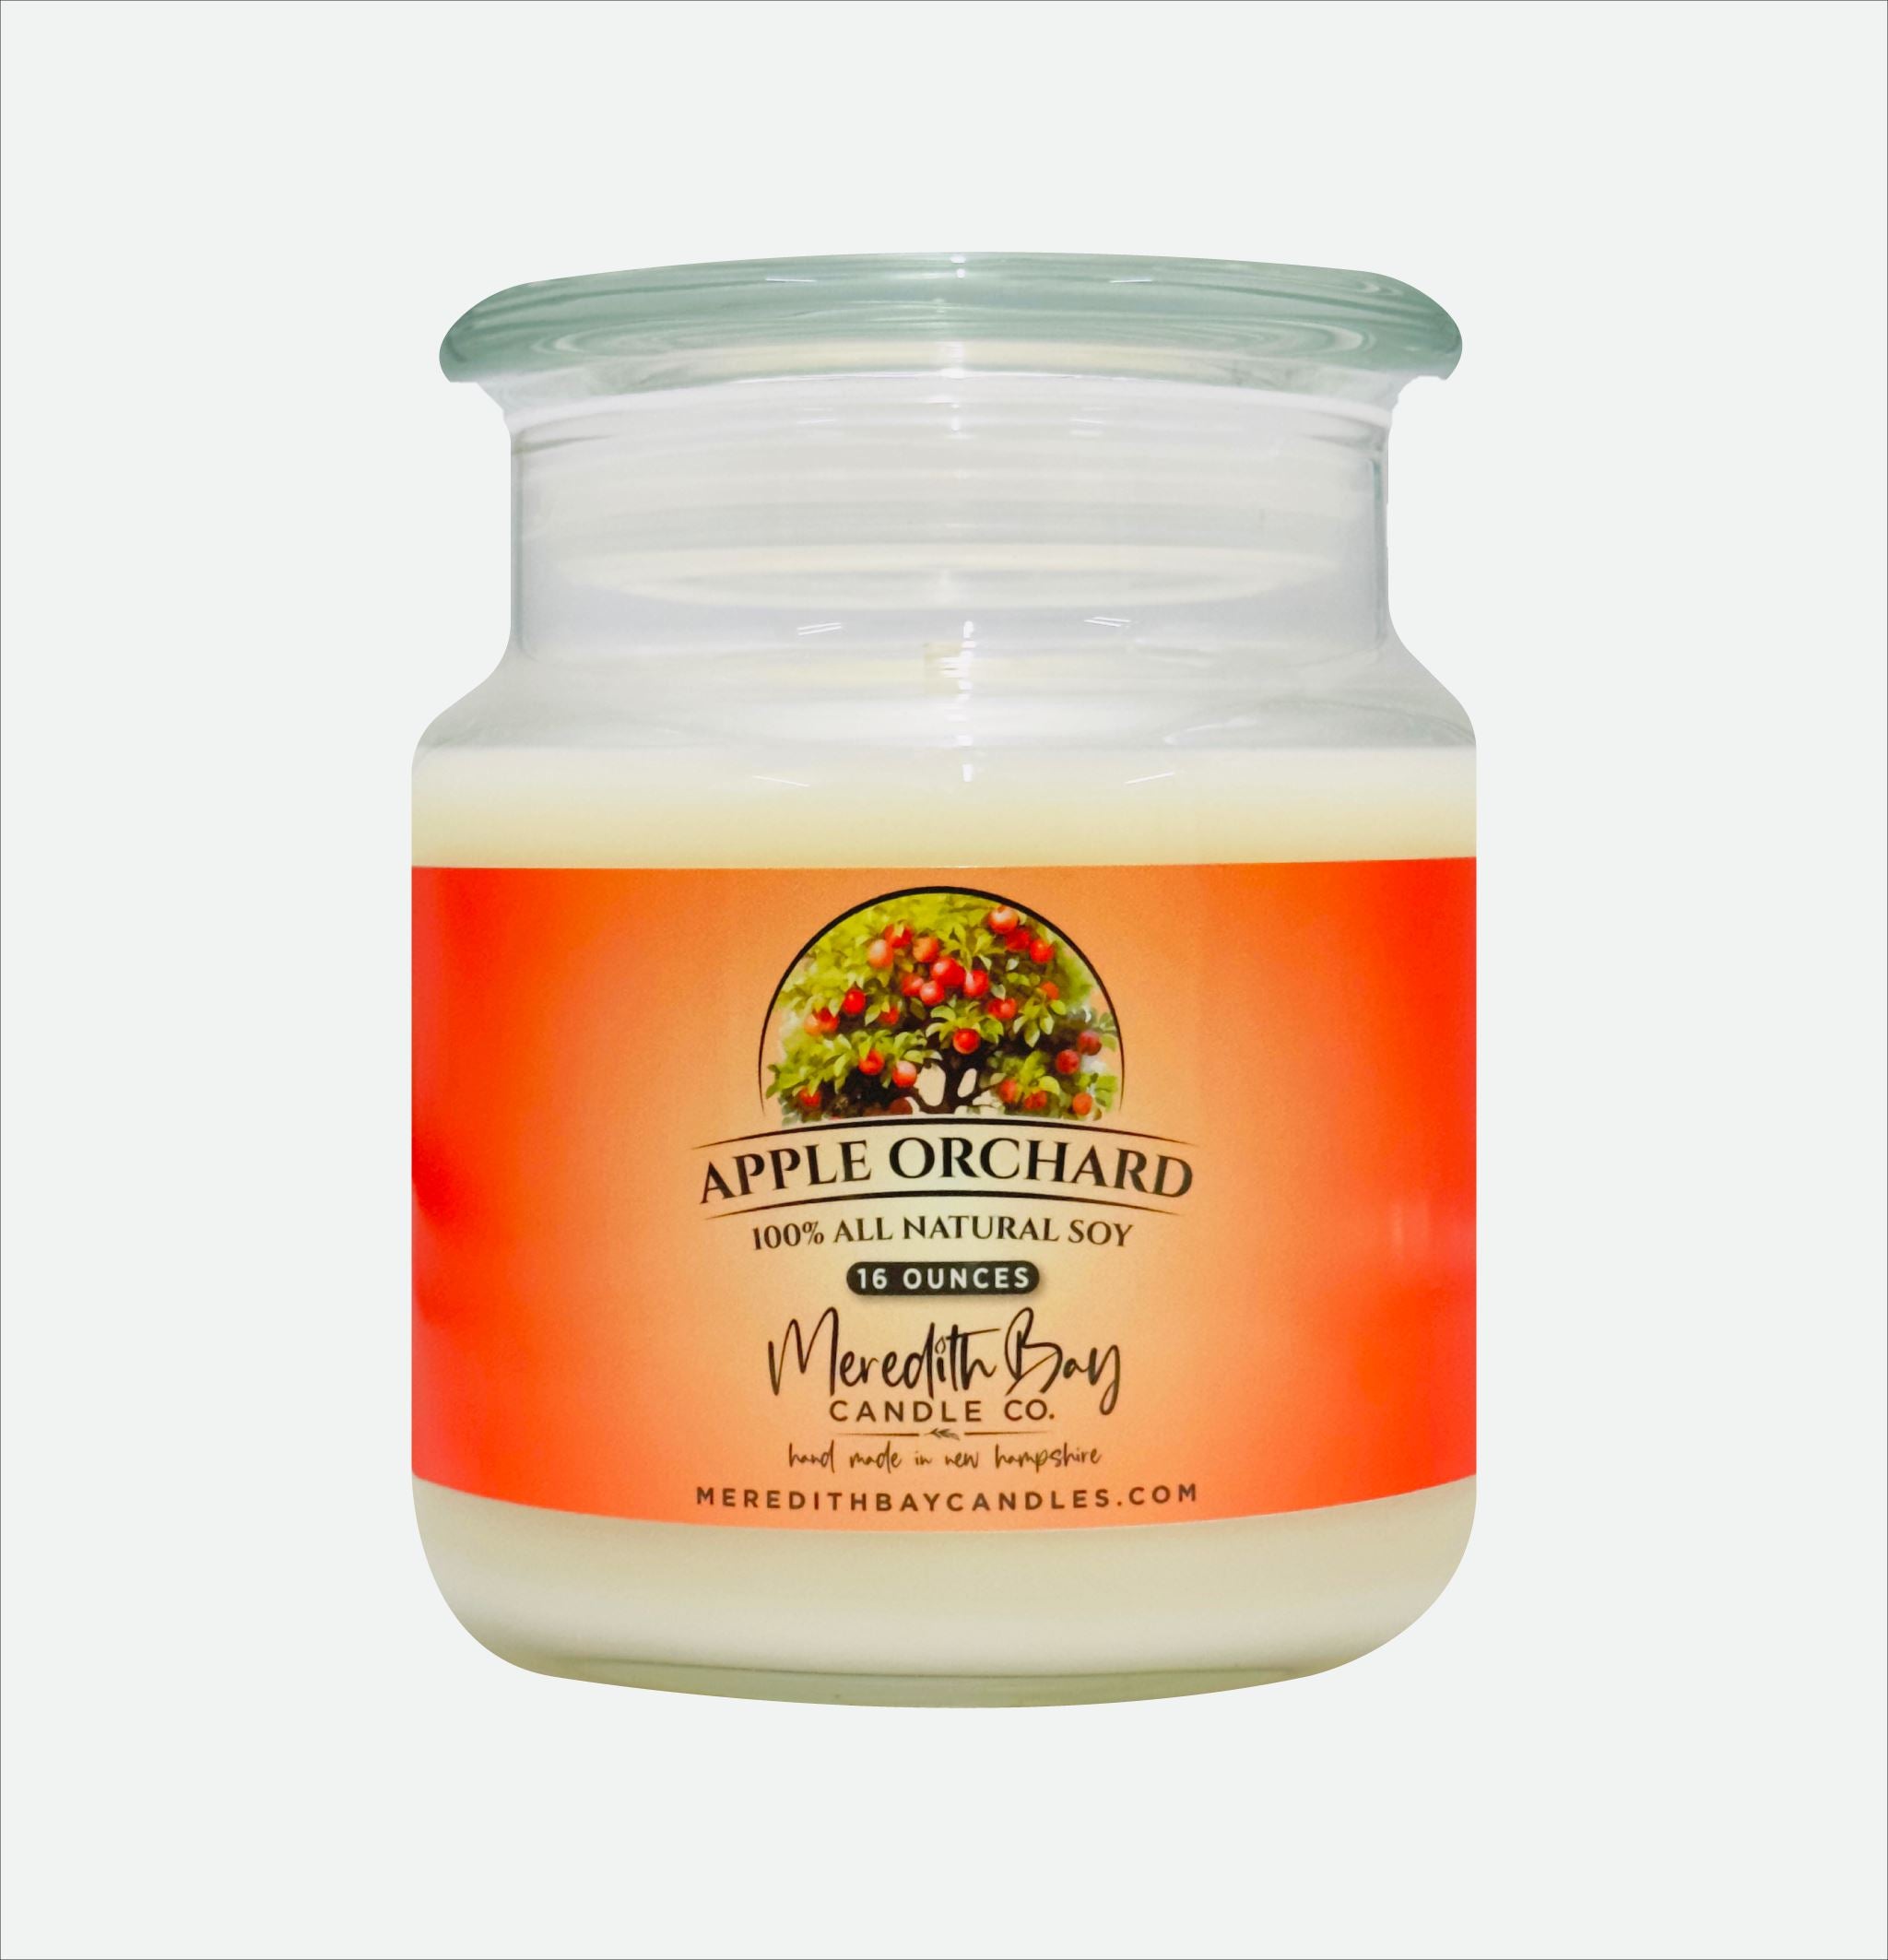 Apple Orchard Soy Candle Soy Candle Meredith Bay Candle Co 16.0 Oz 